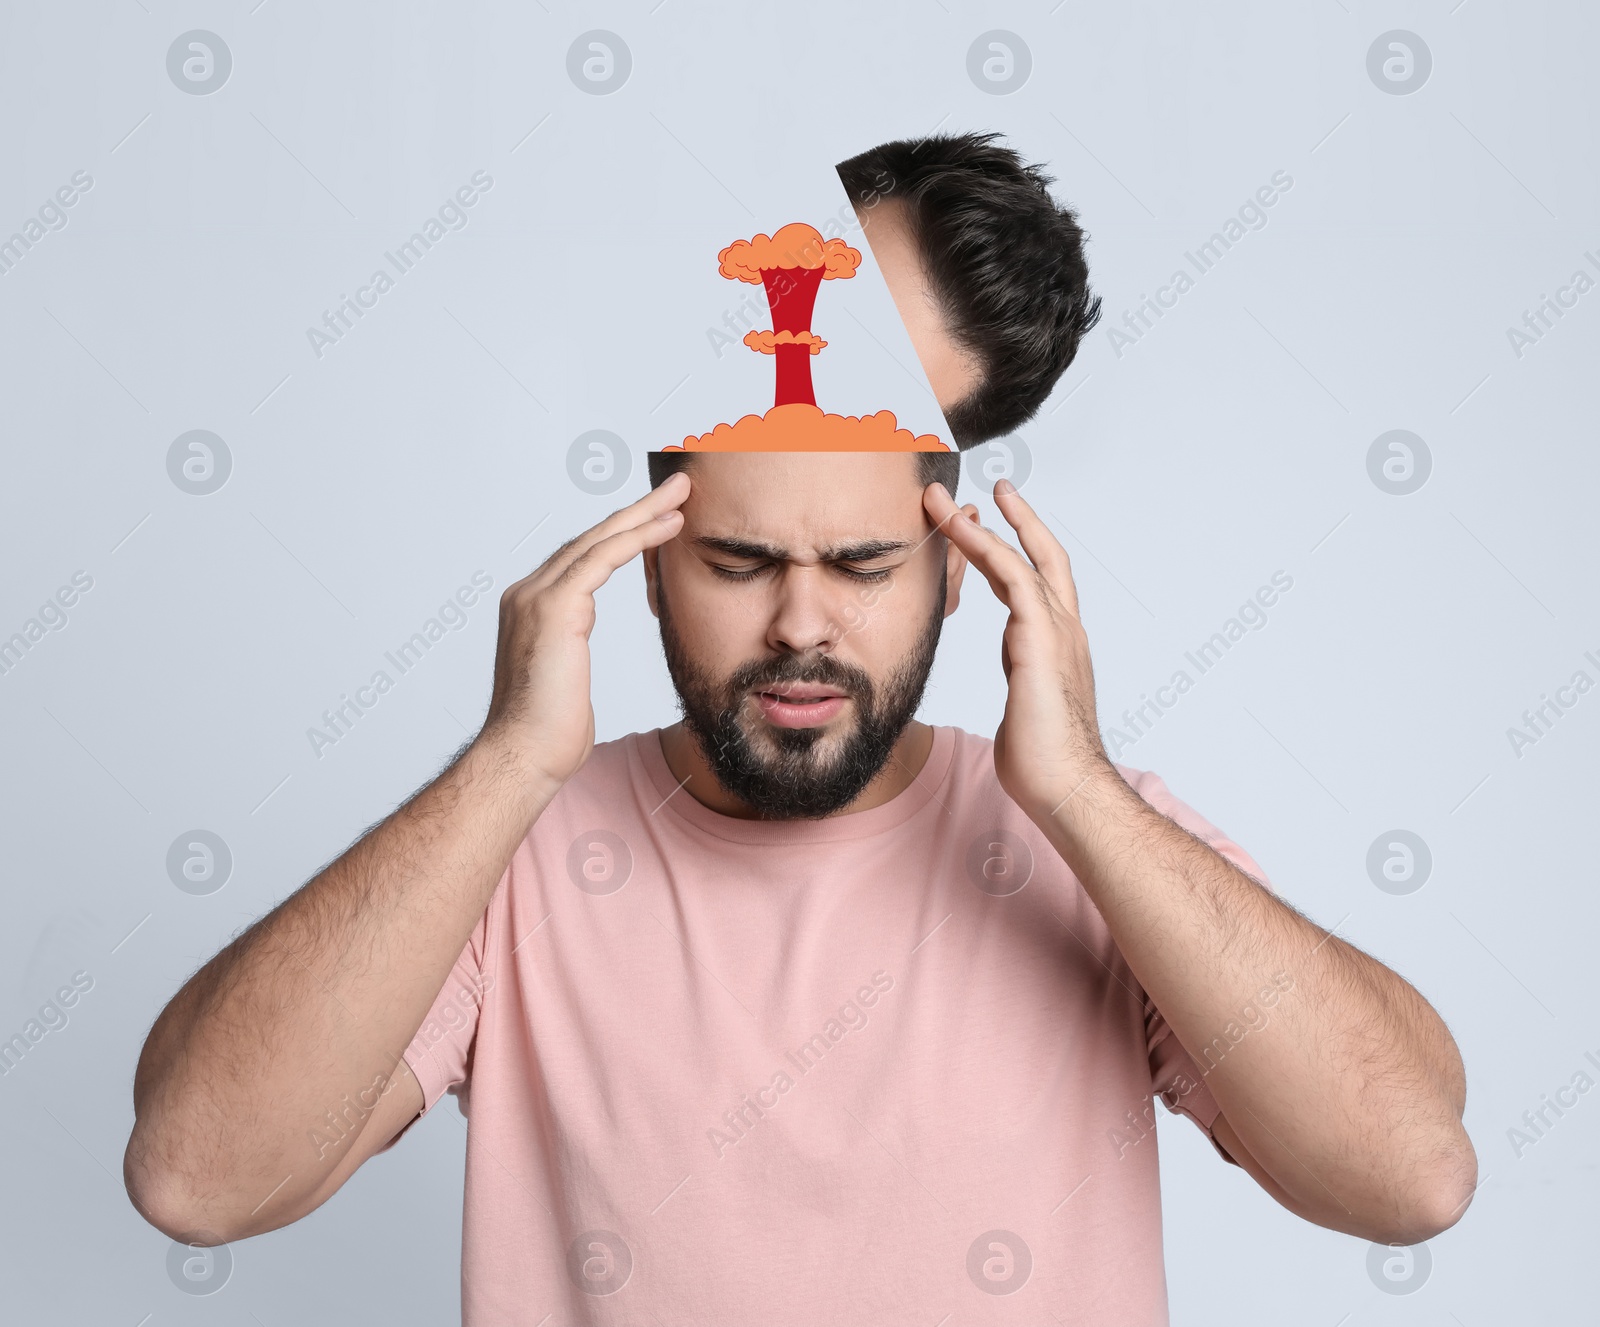 Image of Young man having headache on light background. Illustration of atomic explosion representing severe pain